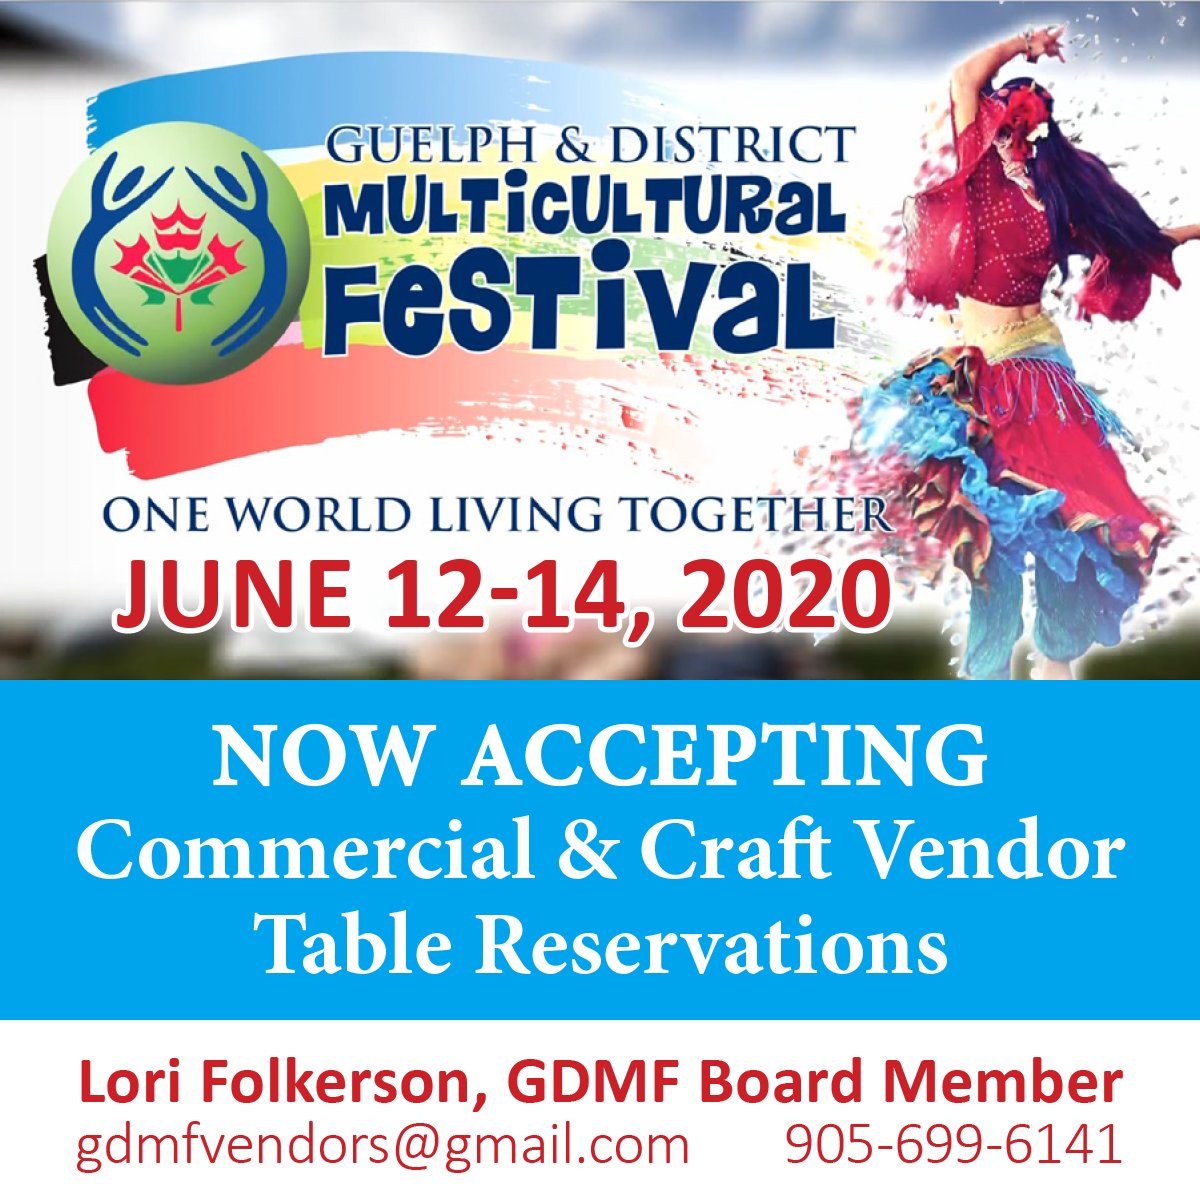 Currently looking for Craft & Commercial Vendors for the Guelph & District Multicultural Festival.
#guelph #smallbusiness #summerfestivals #vendorswanted @PINnetworkGW @GuelphToday @RCityStories @GuelphBugle